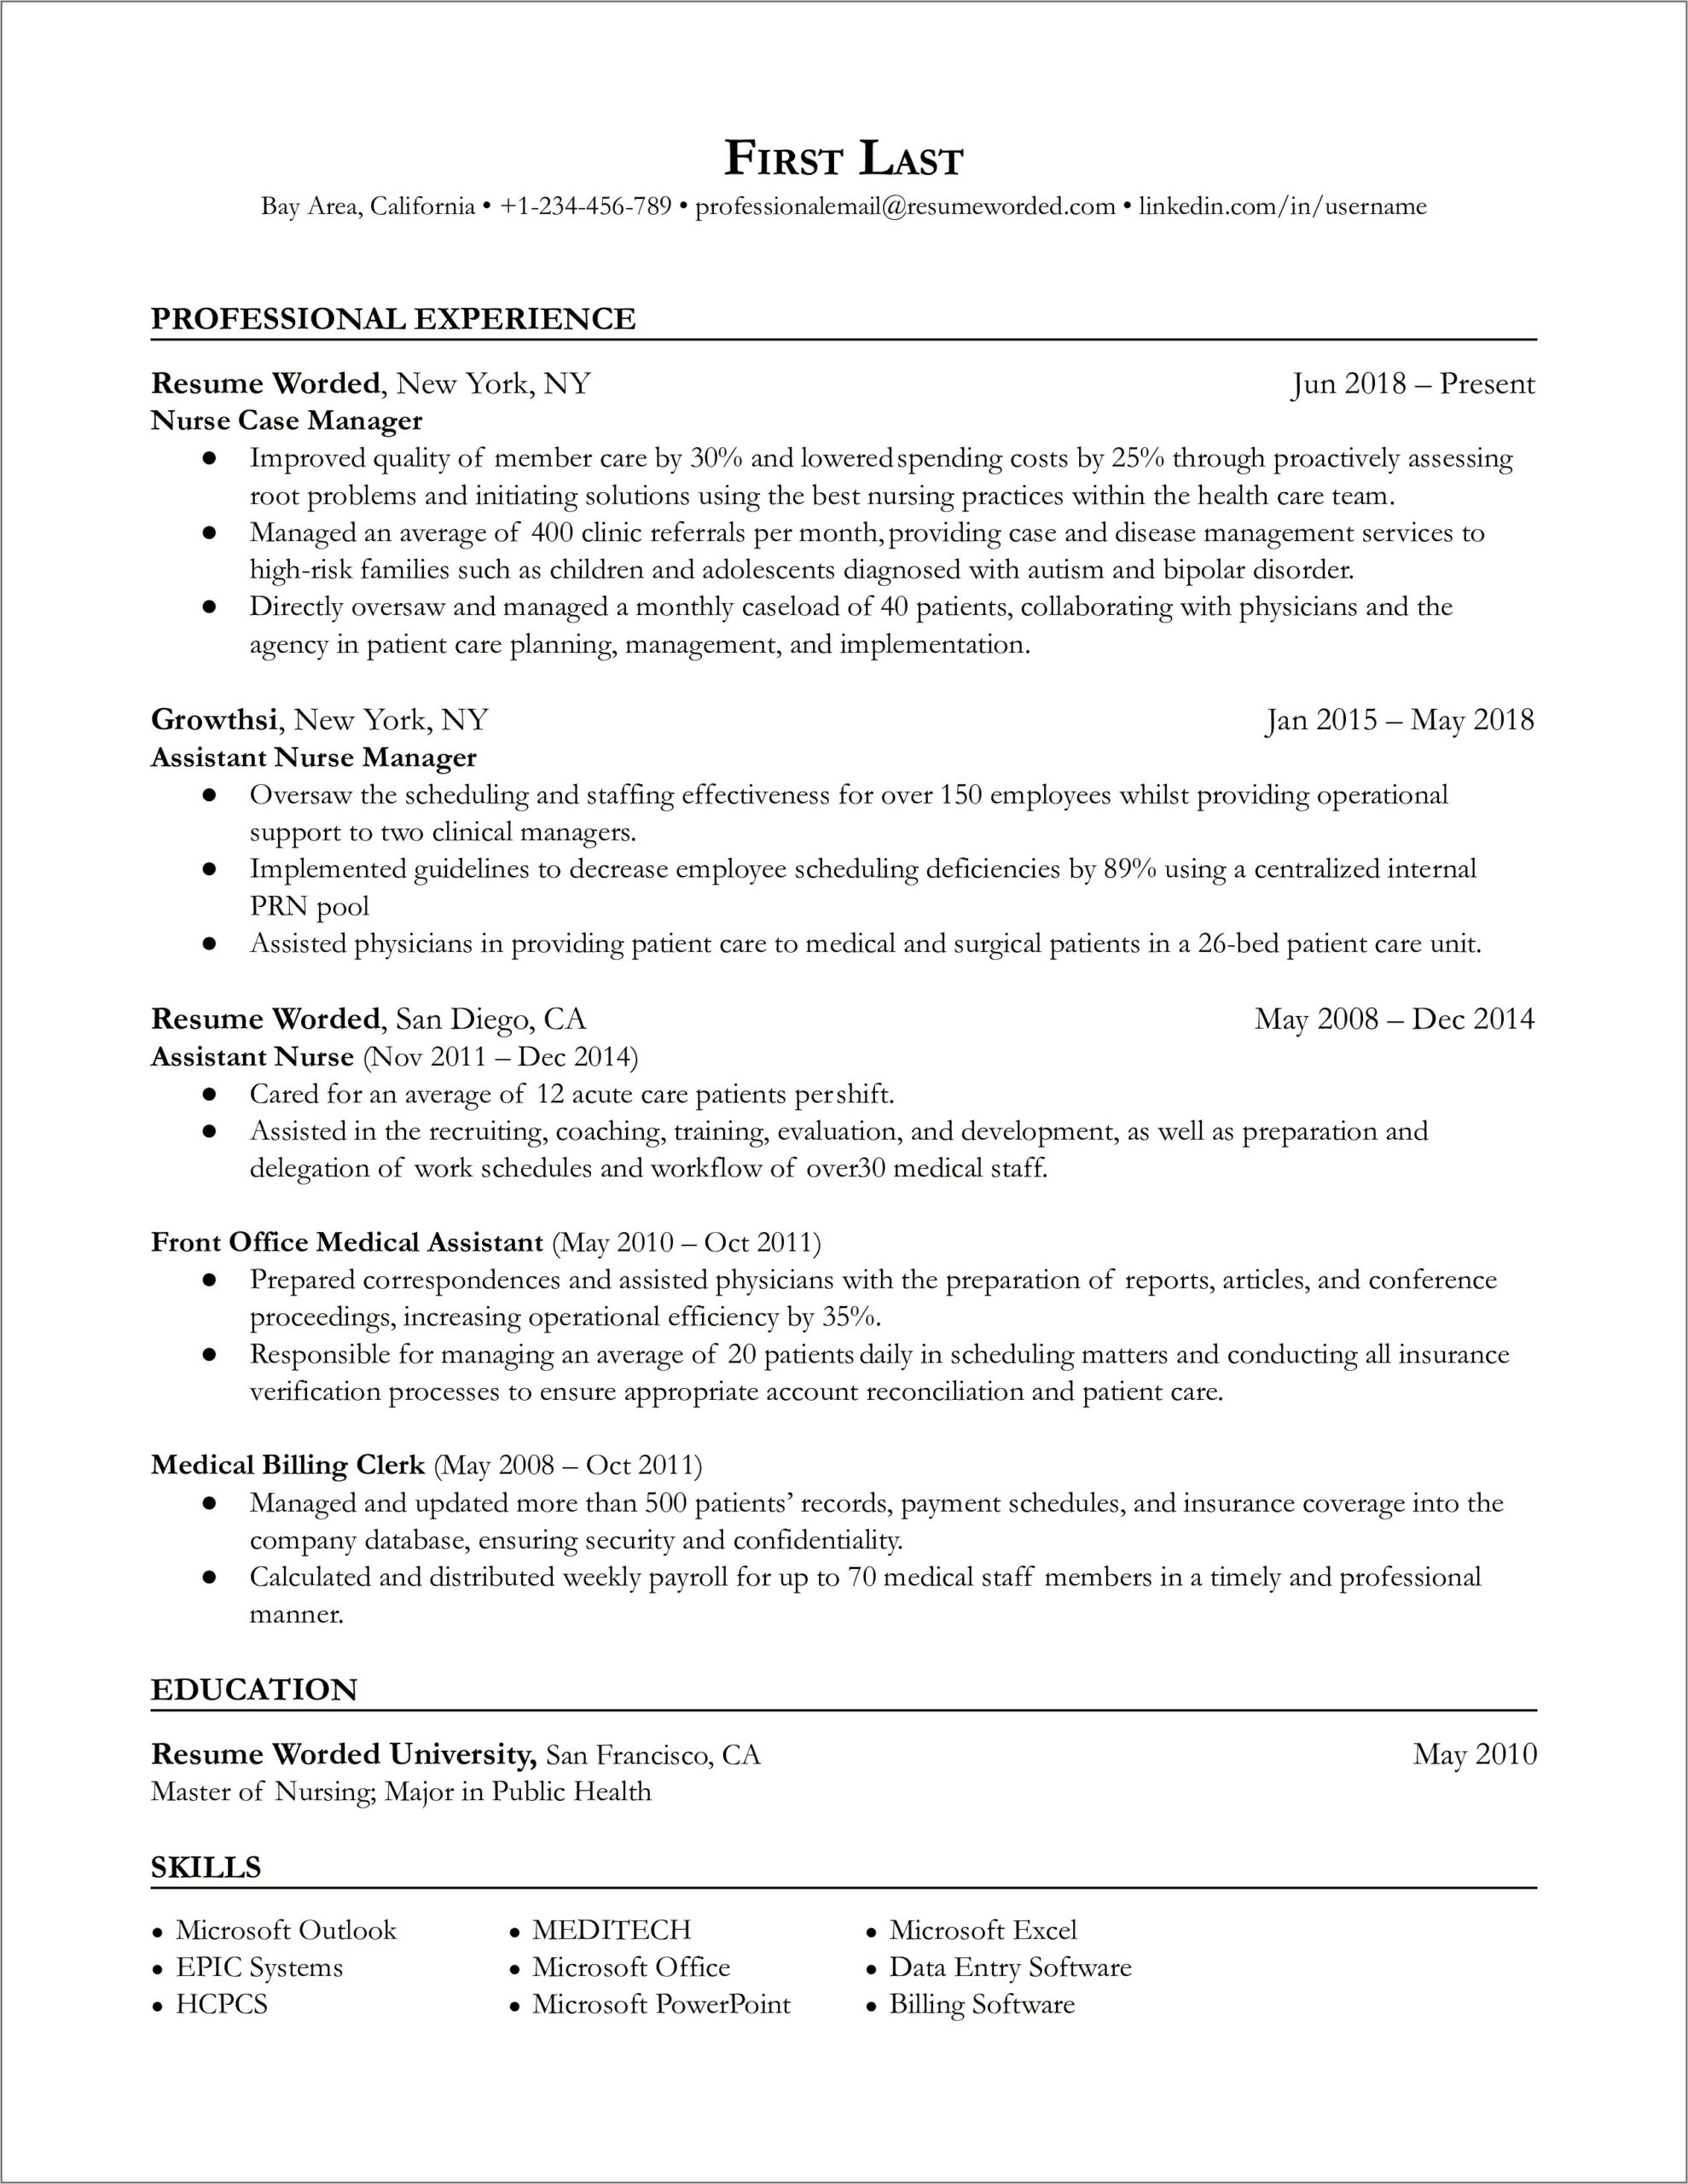 Office Automation Clerk Resume Samples